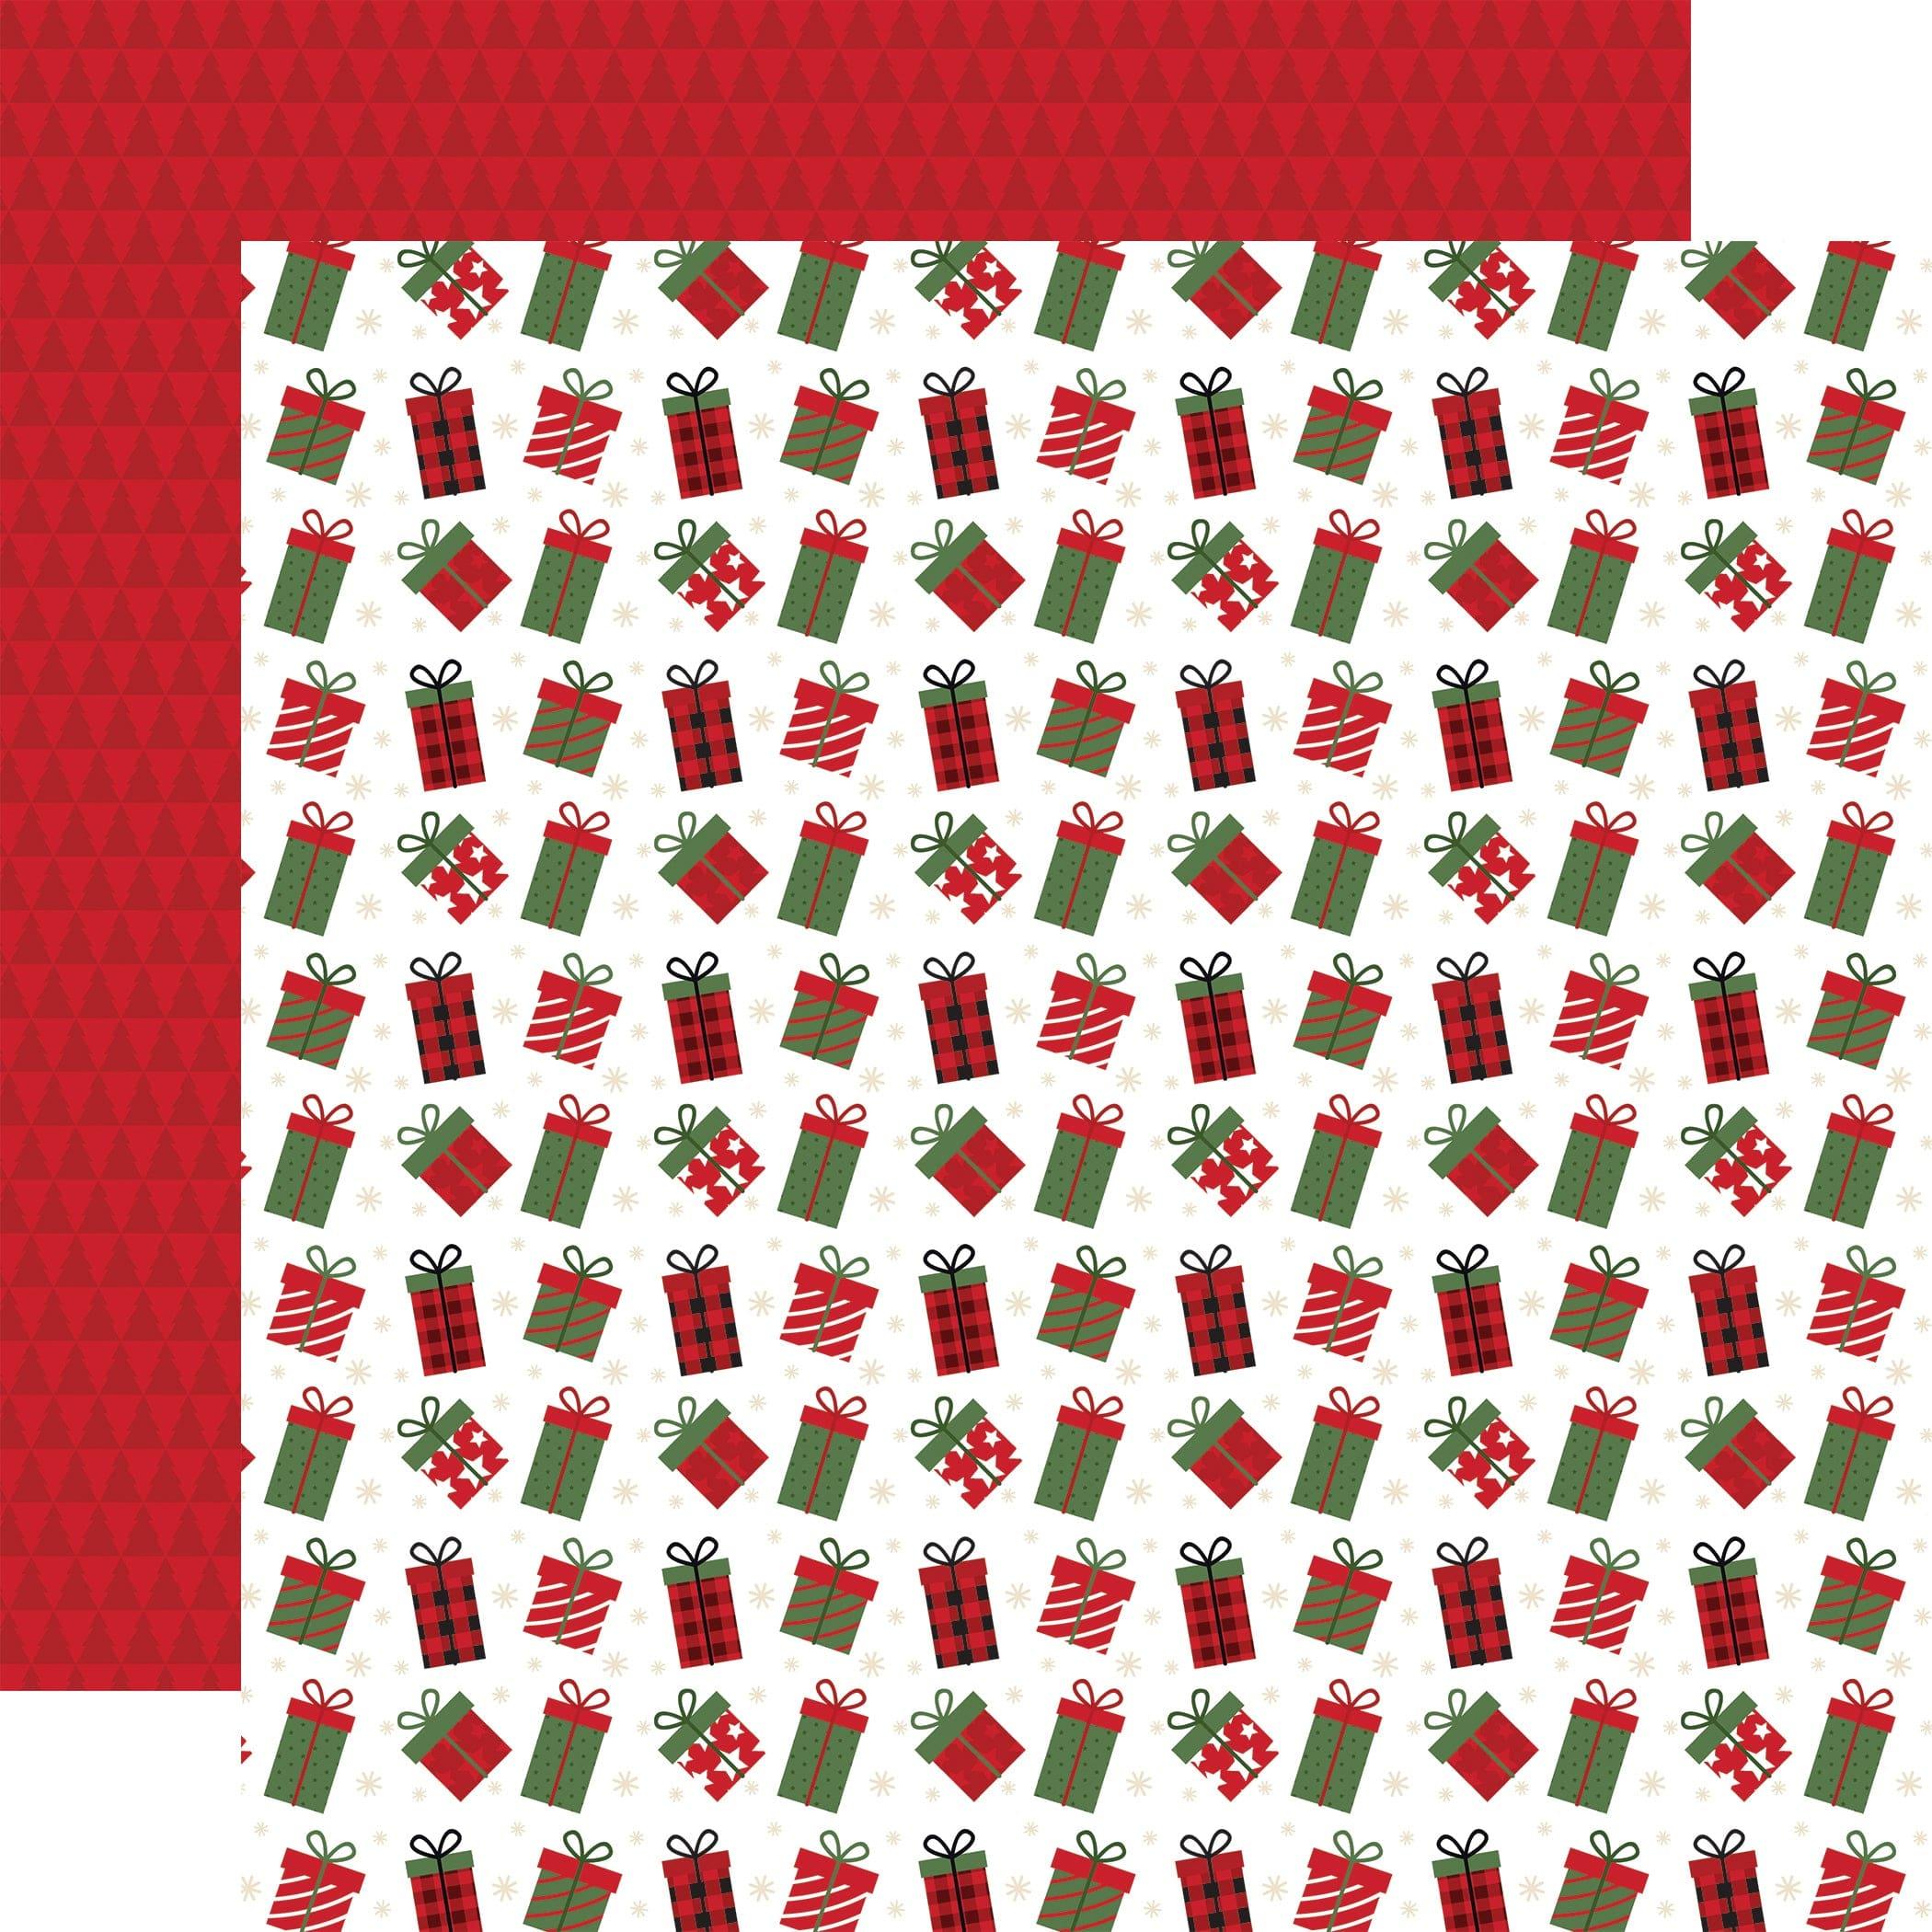 The Magic of Christmas Collection Giving Gifts 12 x 12 Double-Sided Scrapbook Paper by Echo Park Paper - Scrapbook Supply Companies